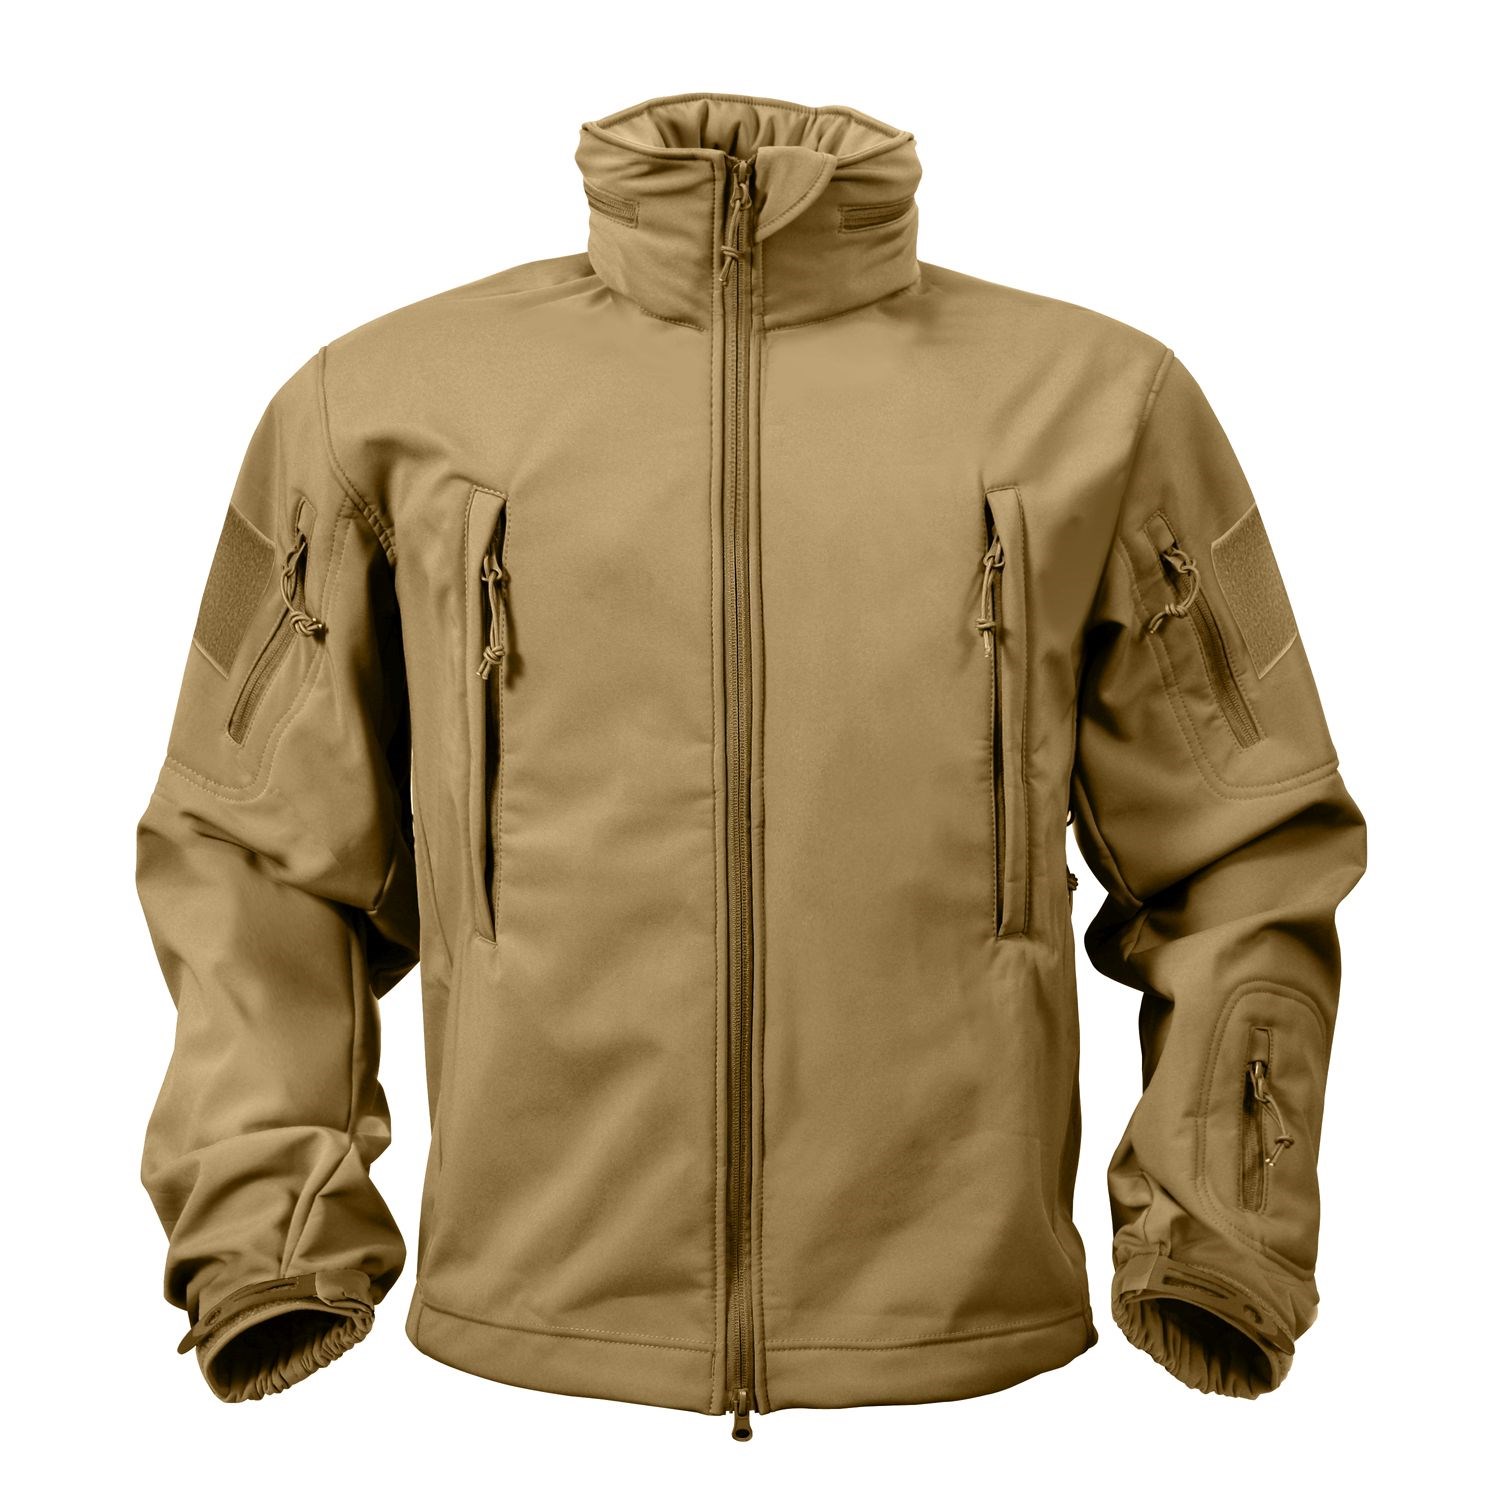 TACTICAL hooded jacket softshell COYOTE ROTHCO 9867 L-11